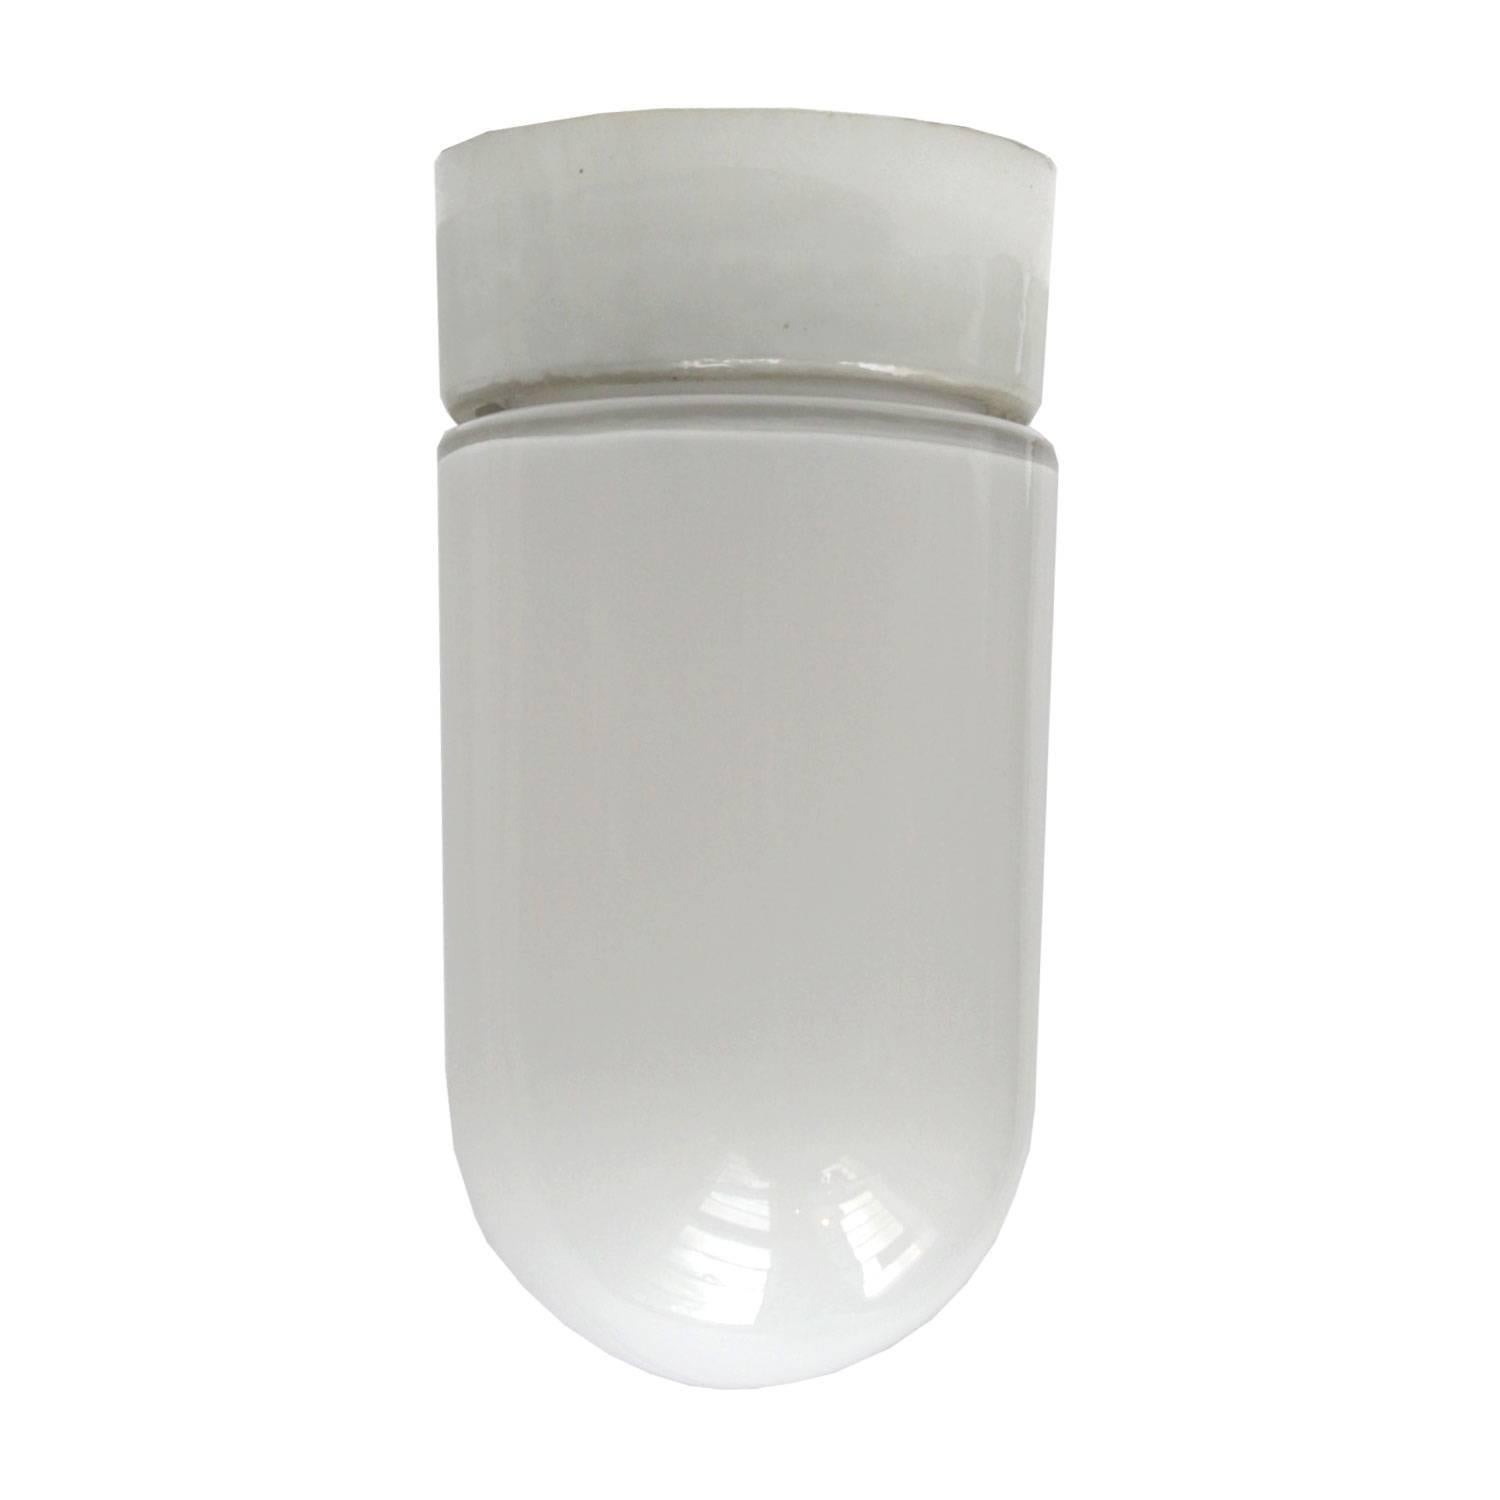 Industrial ceiling lamp. White porcelain. Opaline glass.
Two conductors. No ground.

Weight: 0.8 kg / 1.8 lb

Priced per individual item. All lamps have been made suitable by international standards for incandescent light bulbs, energy-efficient and